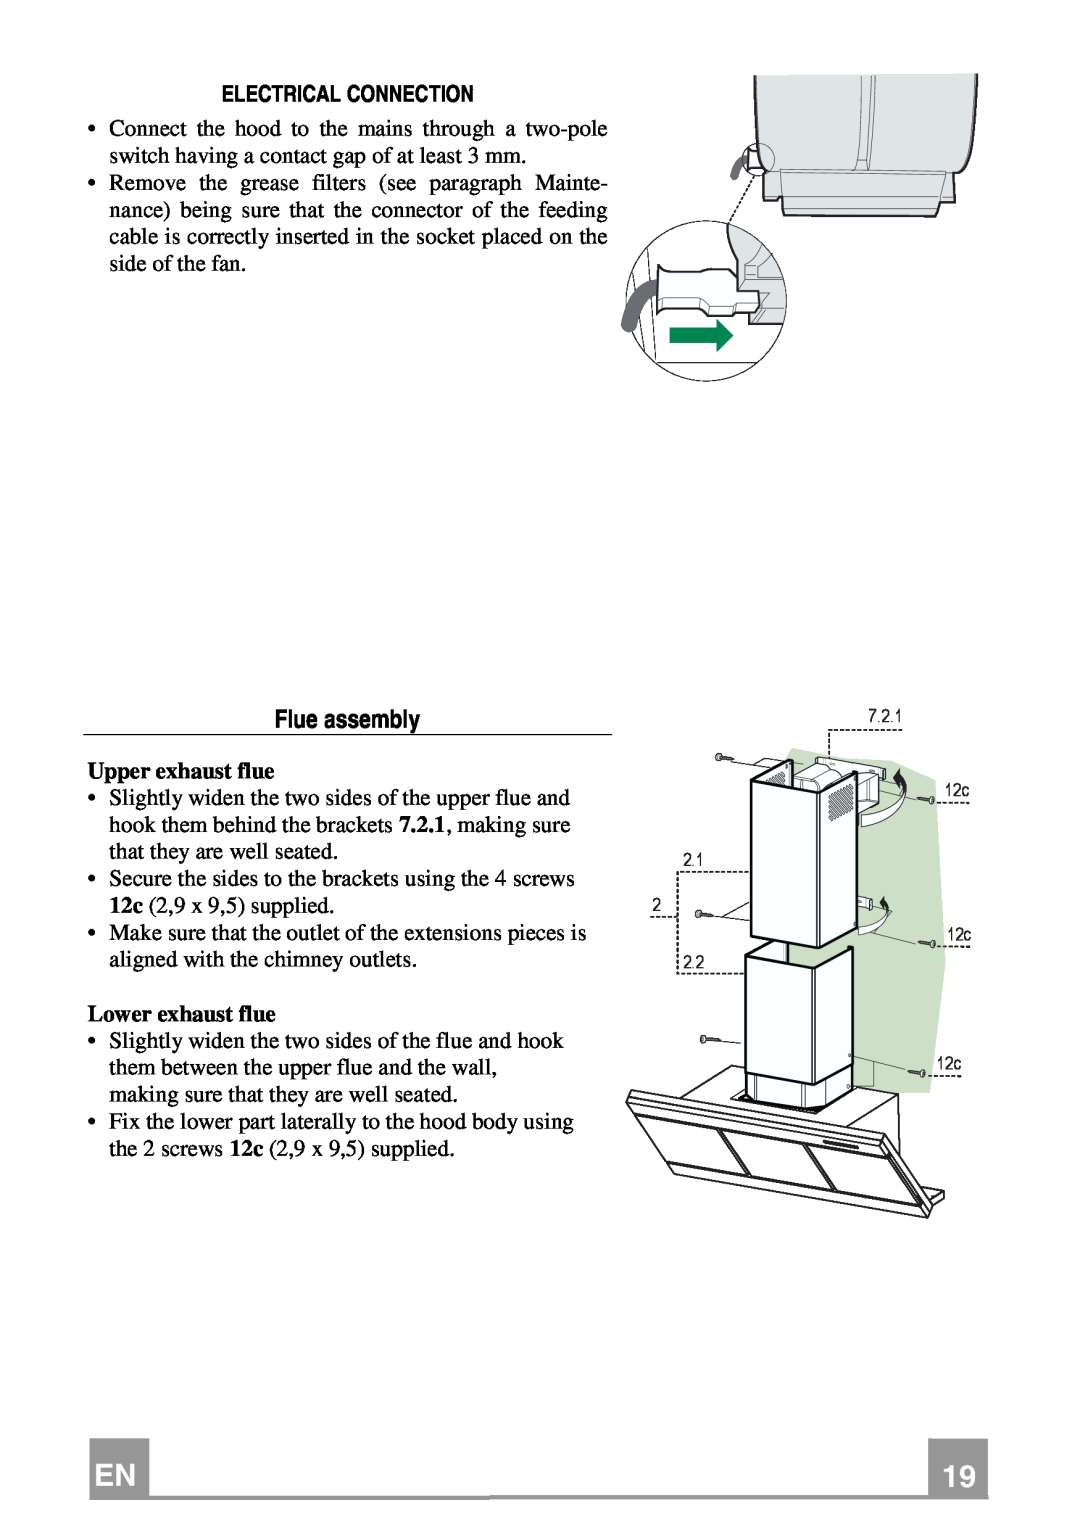 Franke Consumer Products FMY 907 manual Flue assembly, Electrical Connection, Upper exhaust flue, Lower exhaust flue 